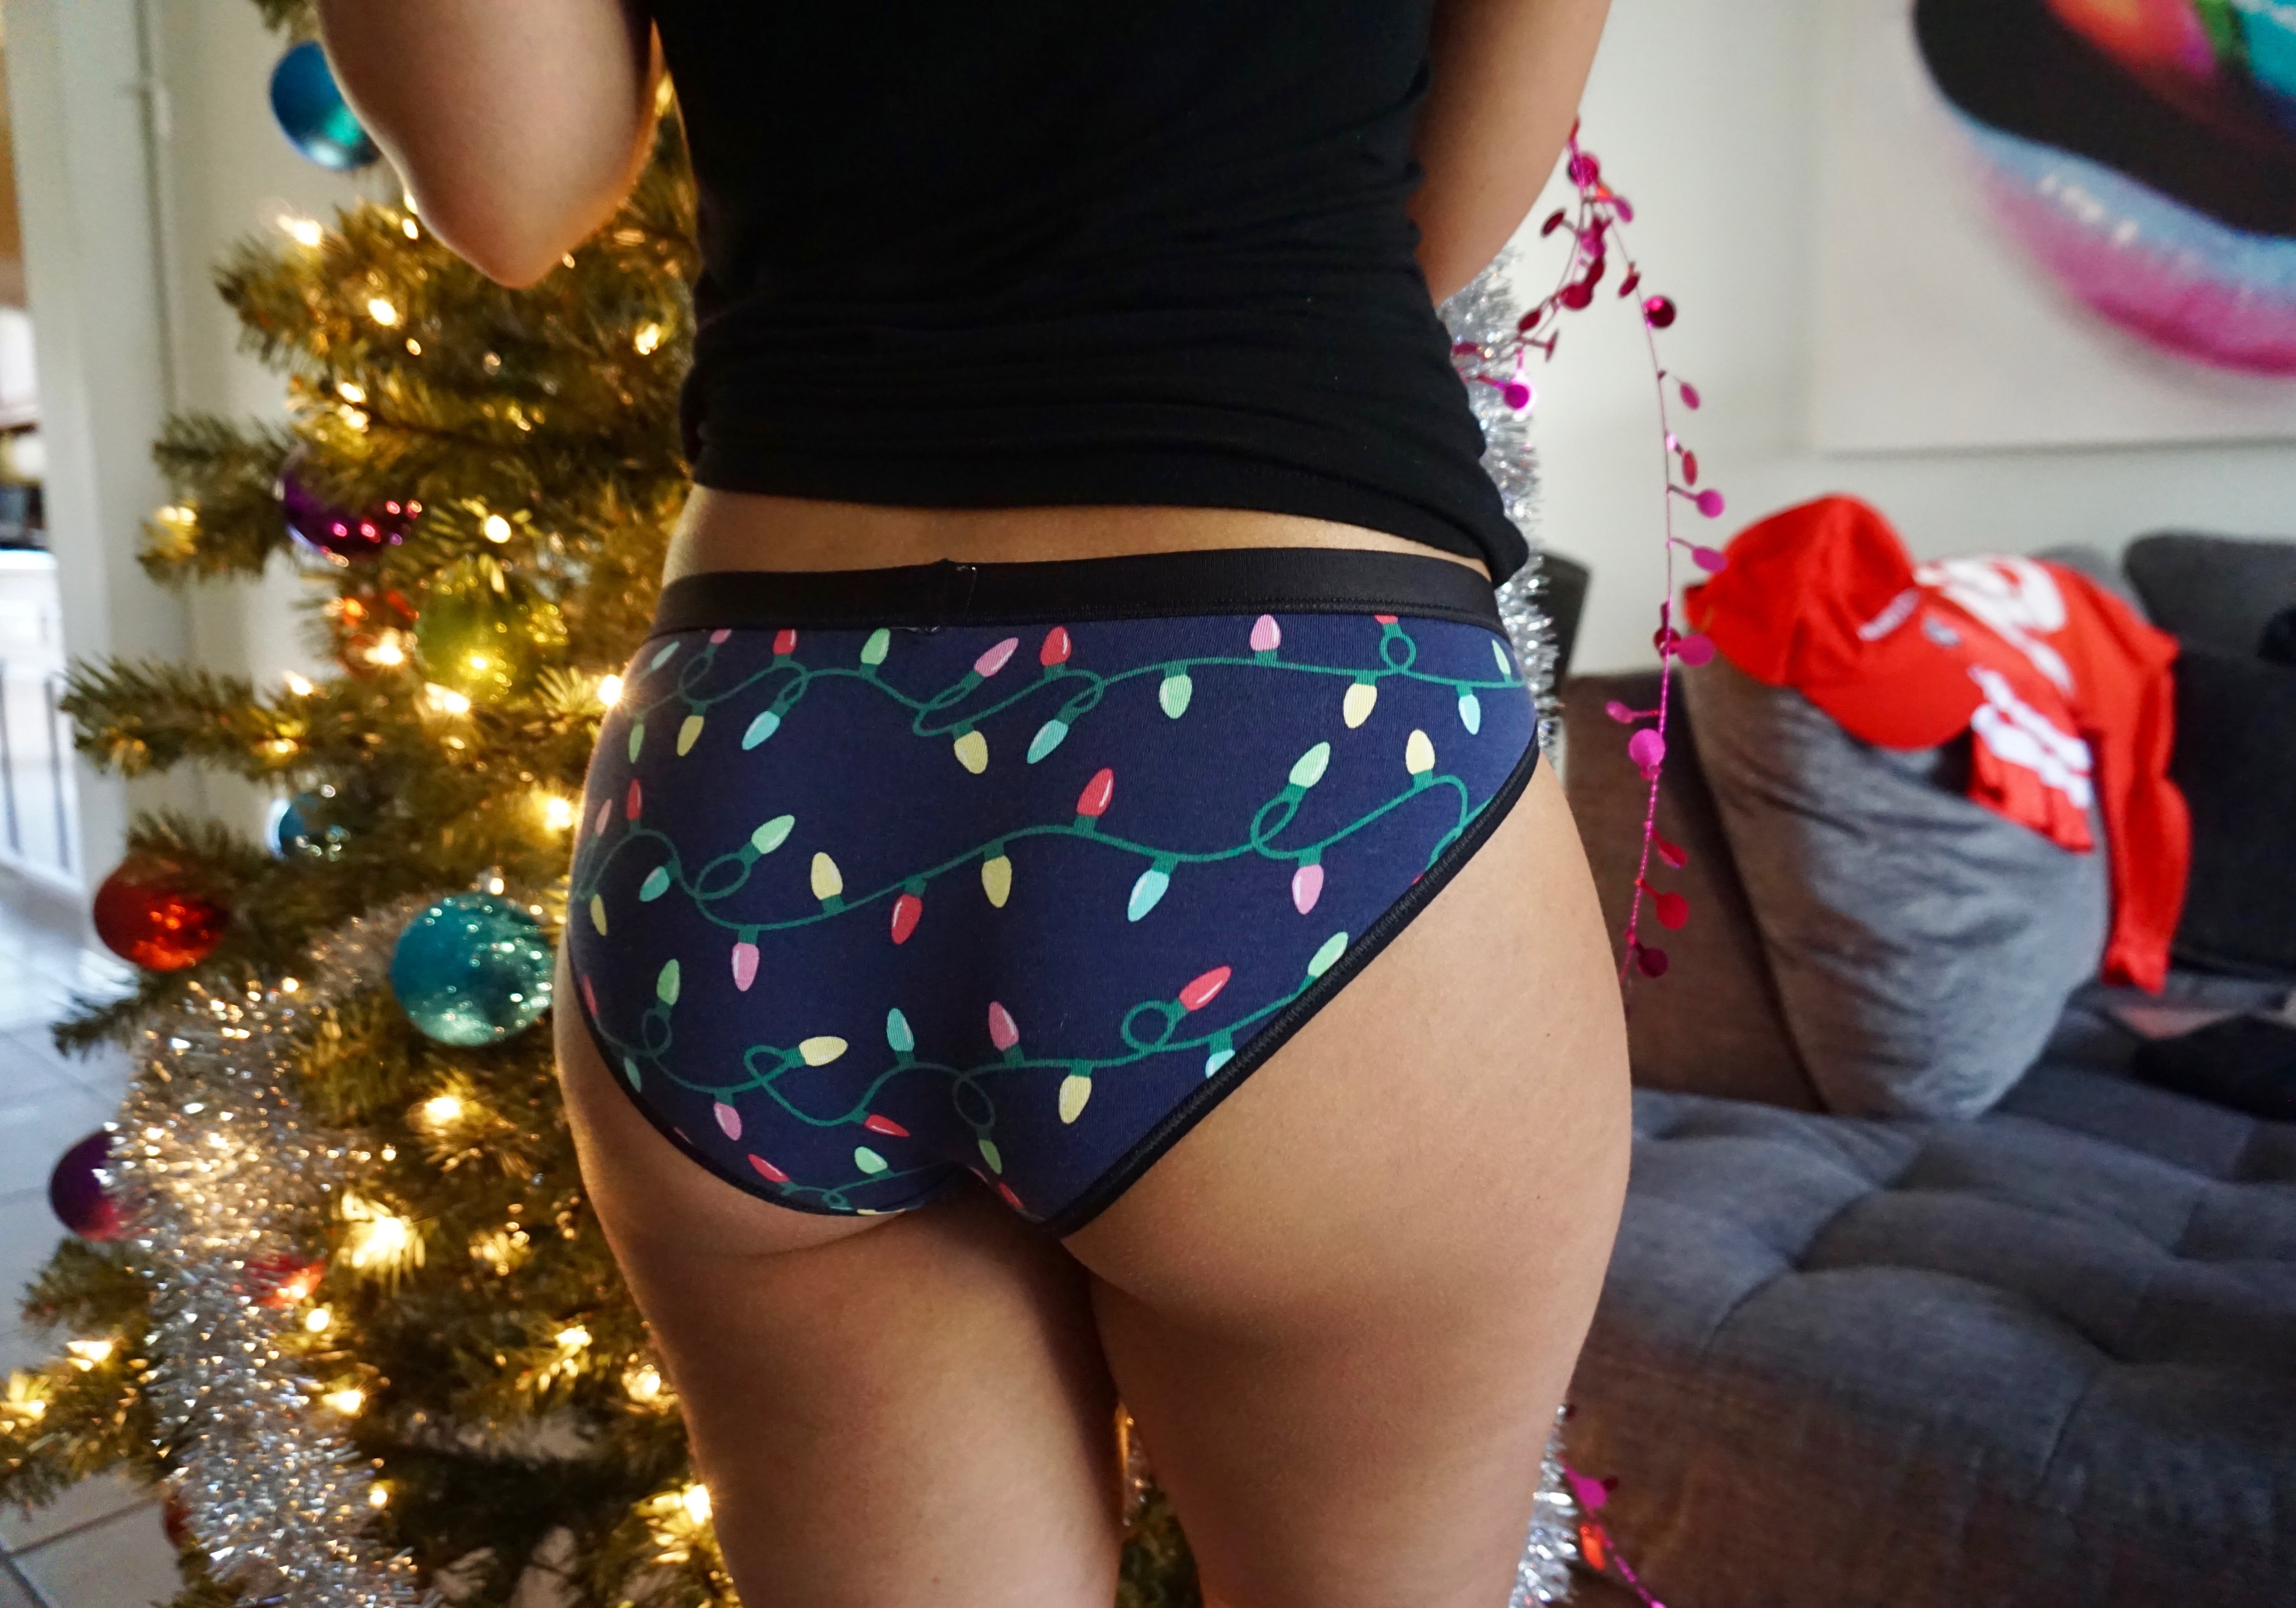 MeUndies means comfort for ALL! @MeUndies is all about helping you